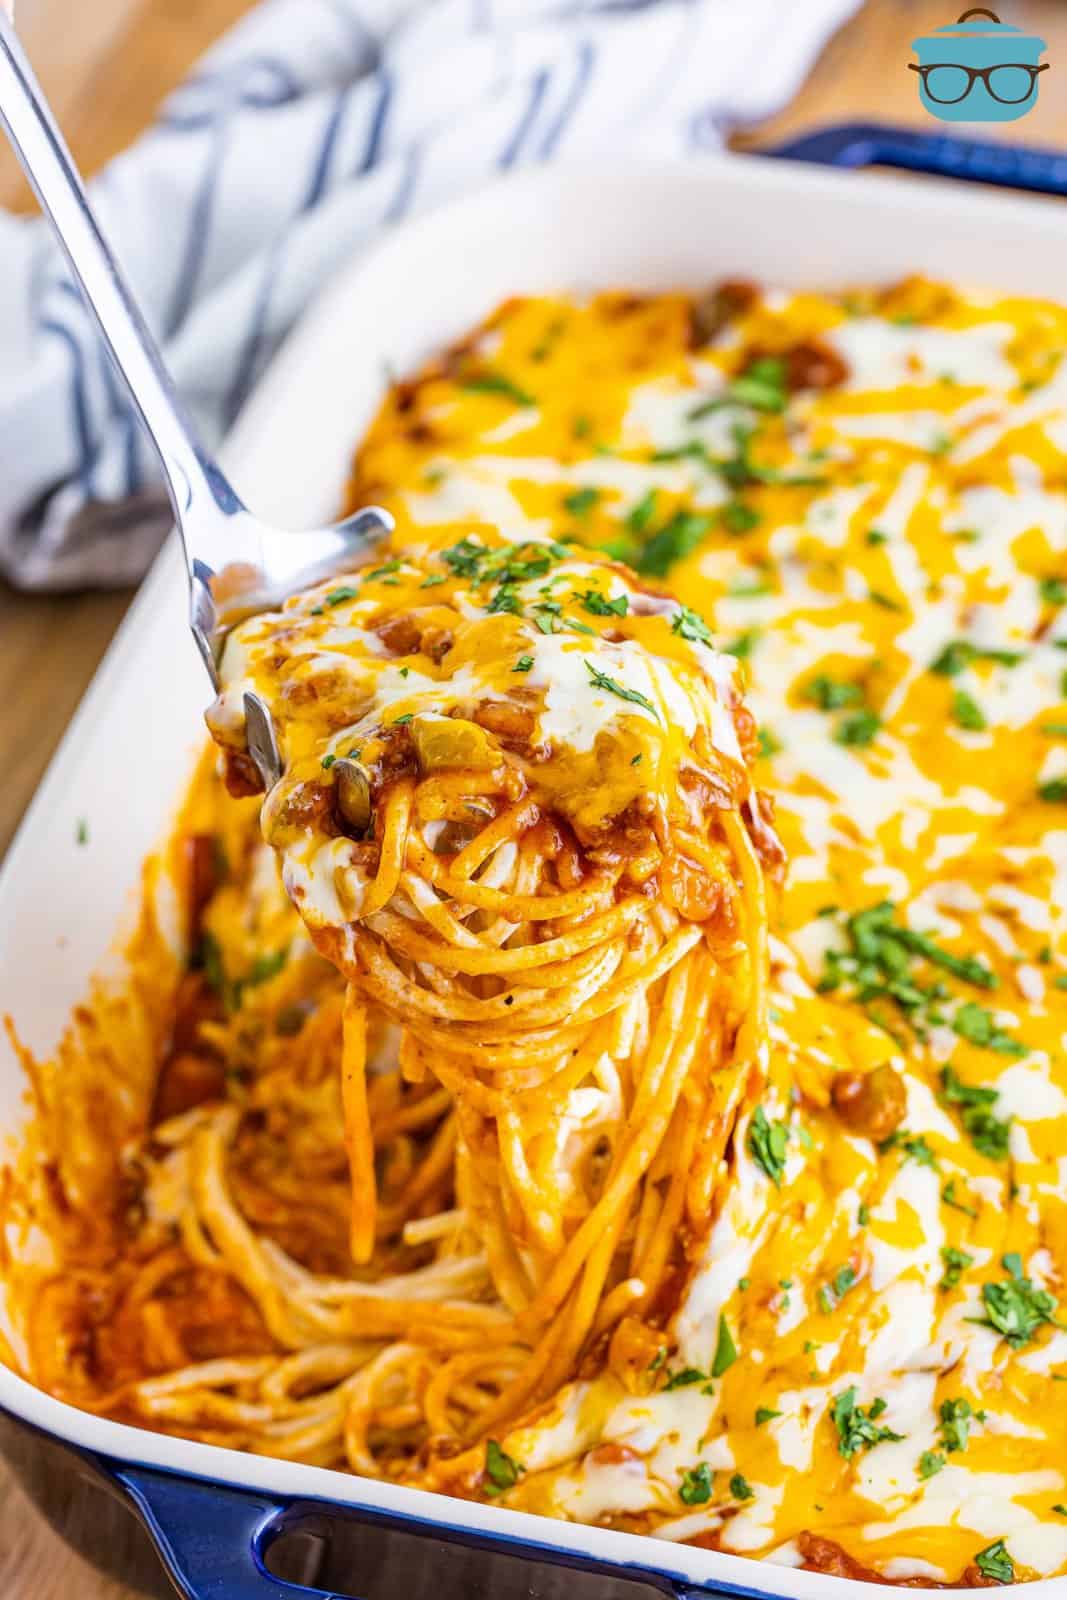 A baking dish full of Mexican million dollar spaghetti with a serving dish taking a serving out.